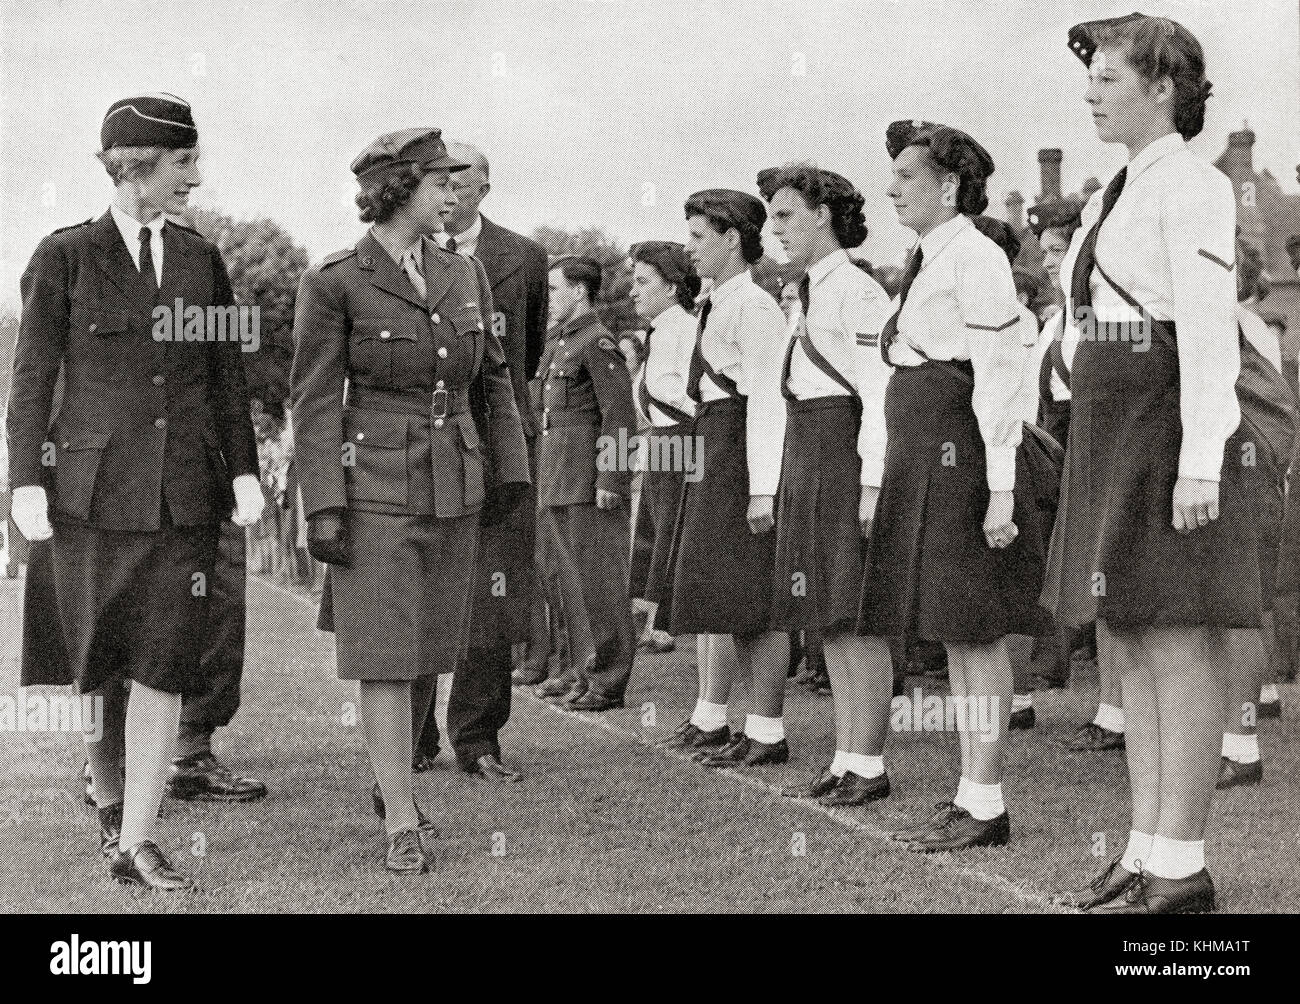 Princess Elizabeth inspecting the Girls' Training Corps, 1945.  Princess Elizabeth of York, future Elizabeth II,  born 1926. Queen of the United Kingdom. Stock Photo